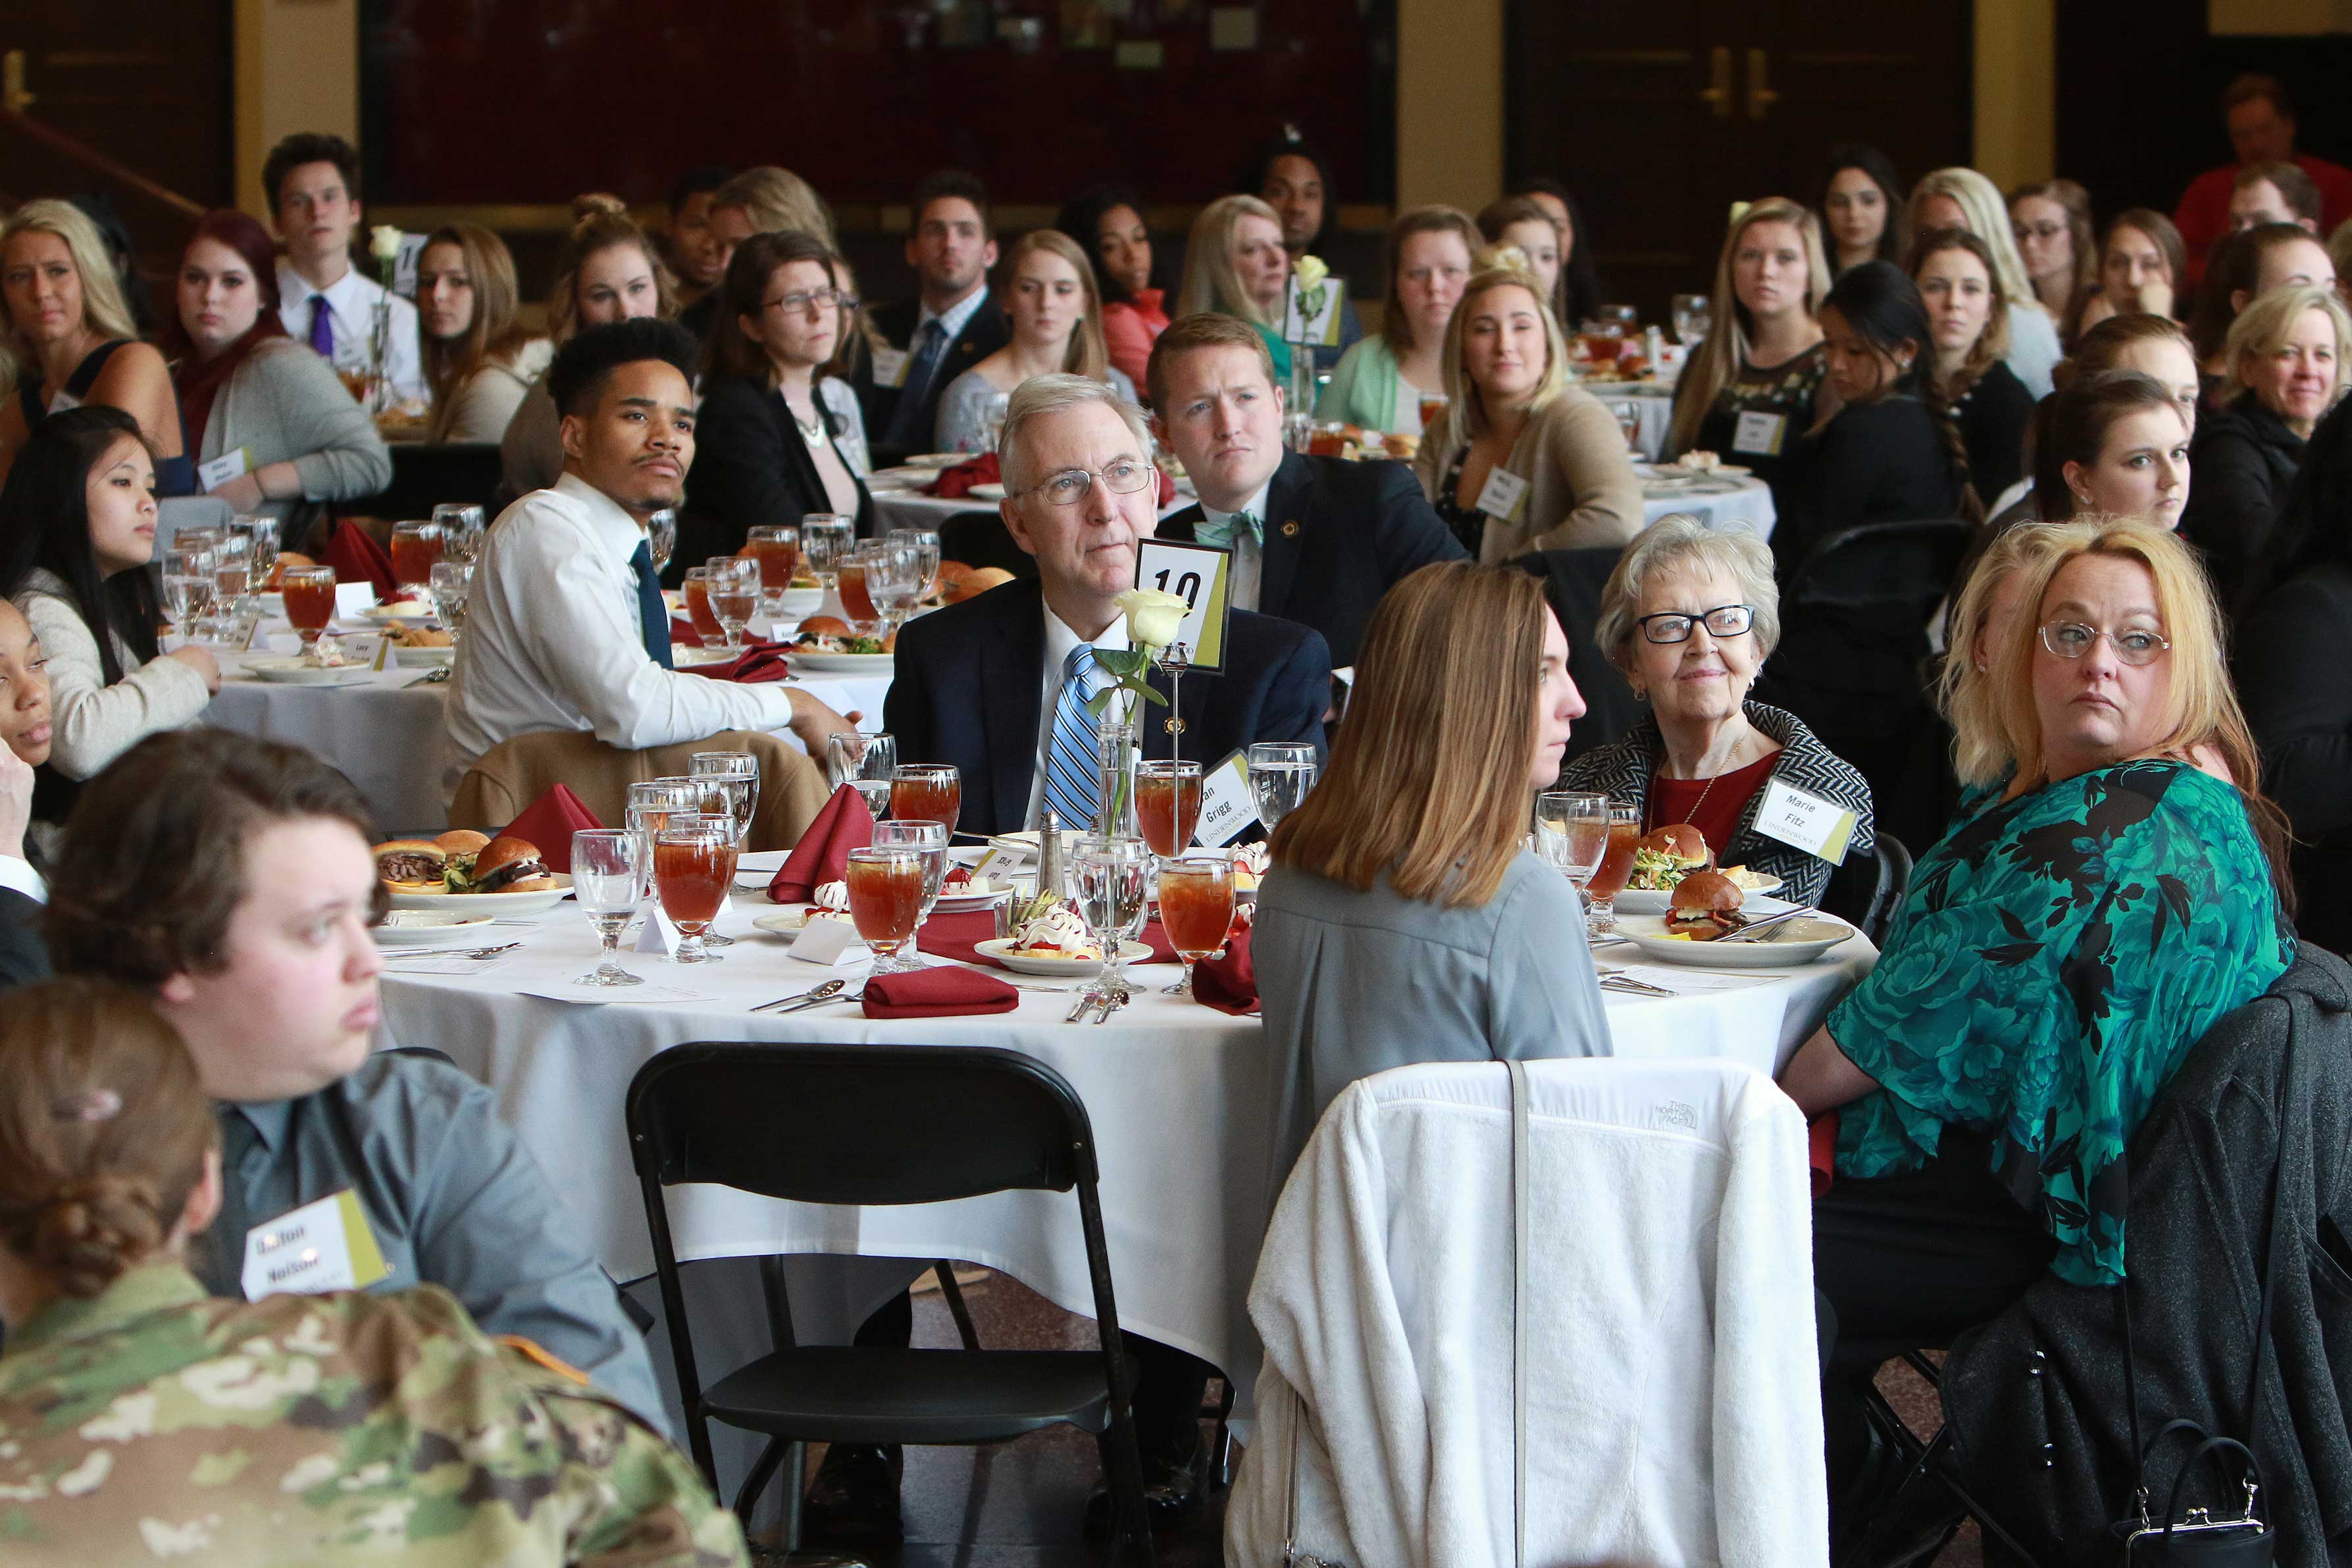 Annual Endowed Scholarship Luncheon Draws Large Crowd | News